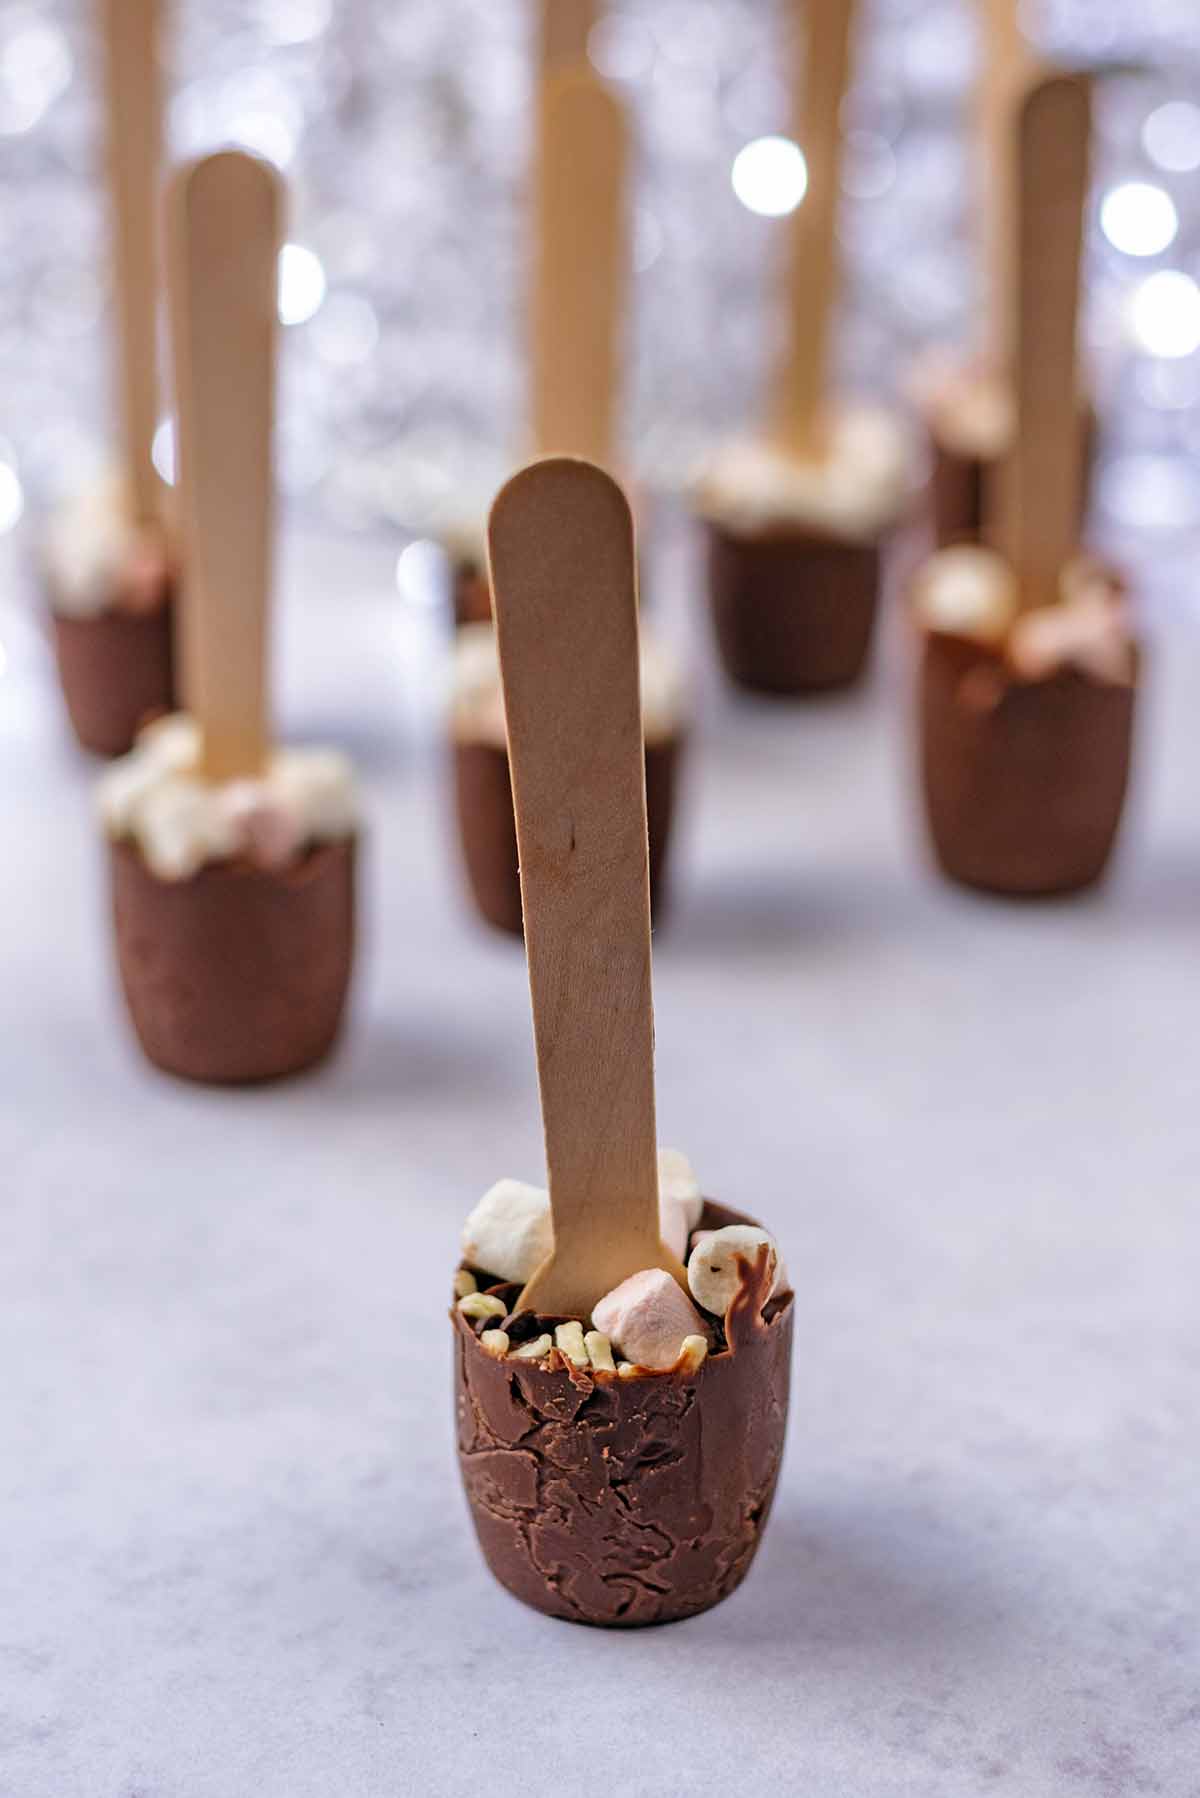 Eight hot chocolate spoons stood in front of a sparkly background.